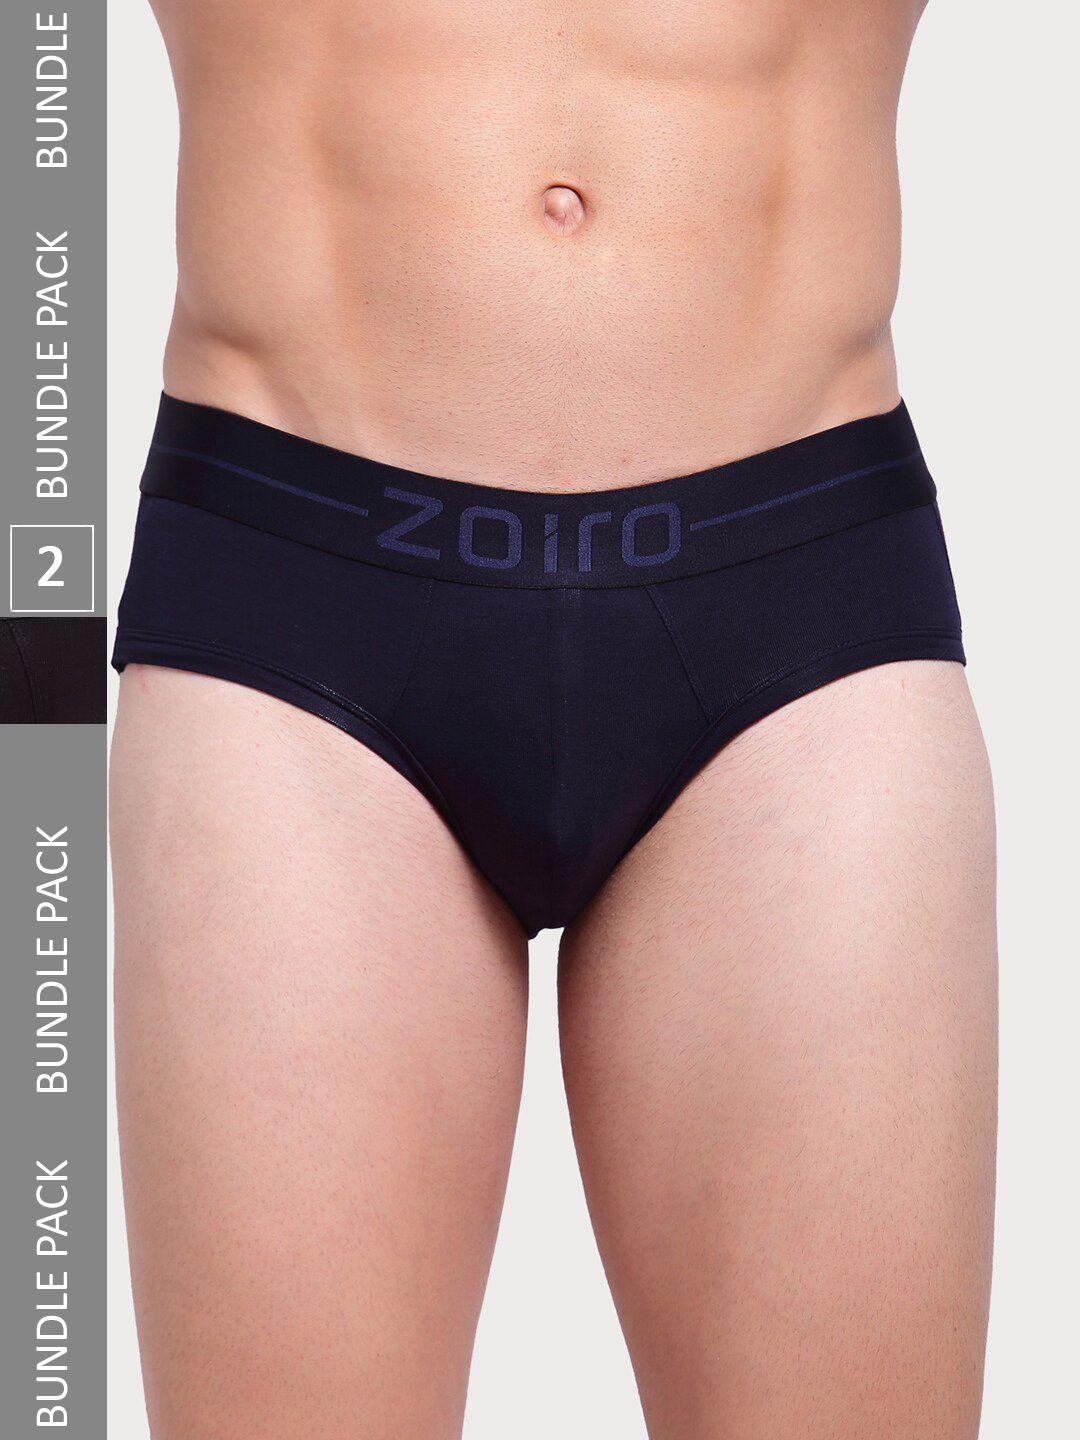 zoiro-men-pack-of-2-solid-mid-rise-basic-briefs